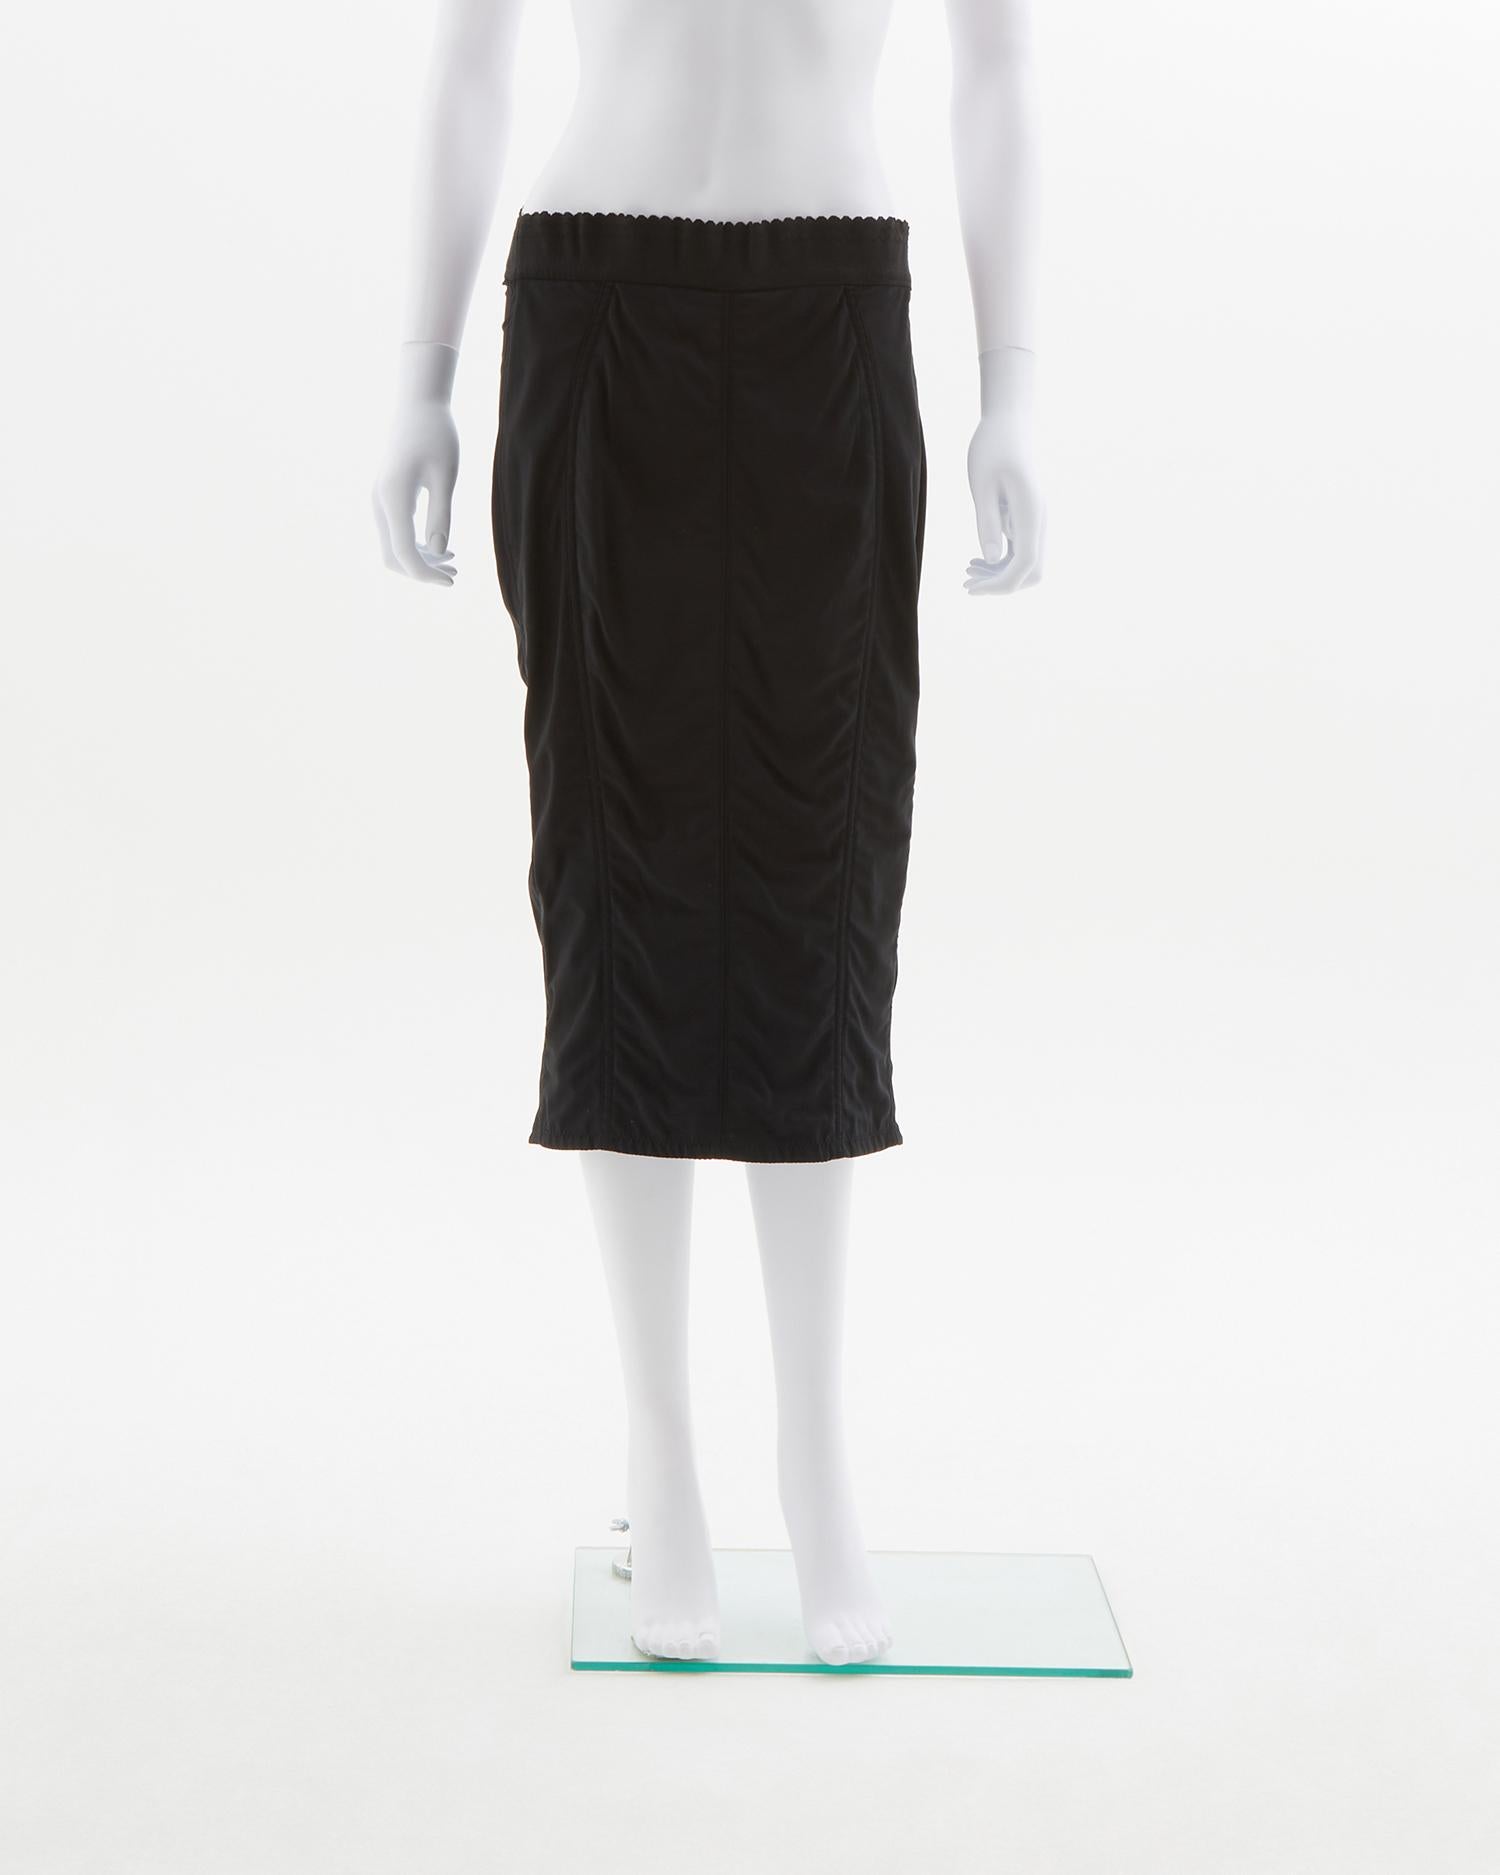 - Satin front black panel with hook-and-eye detail referencing corsetry 
- Sold by Skof.Archive
- Hight waist stretch pencil skirt
- Stretchy composition 
- Wide elasticated waistband 
- Spring Summer 1991

Size : 
FR 38 - IT 42 - UK 10 - US 6